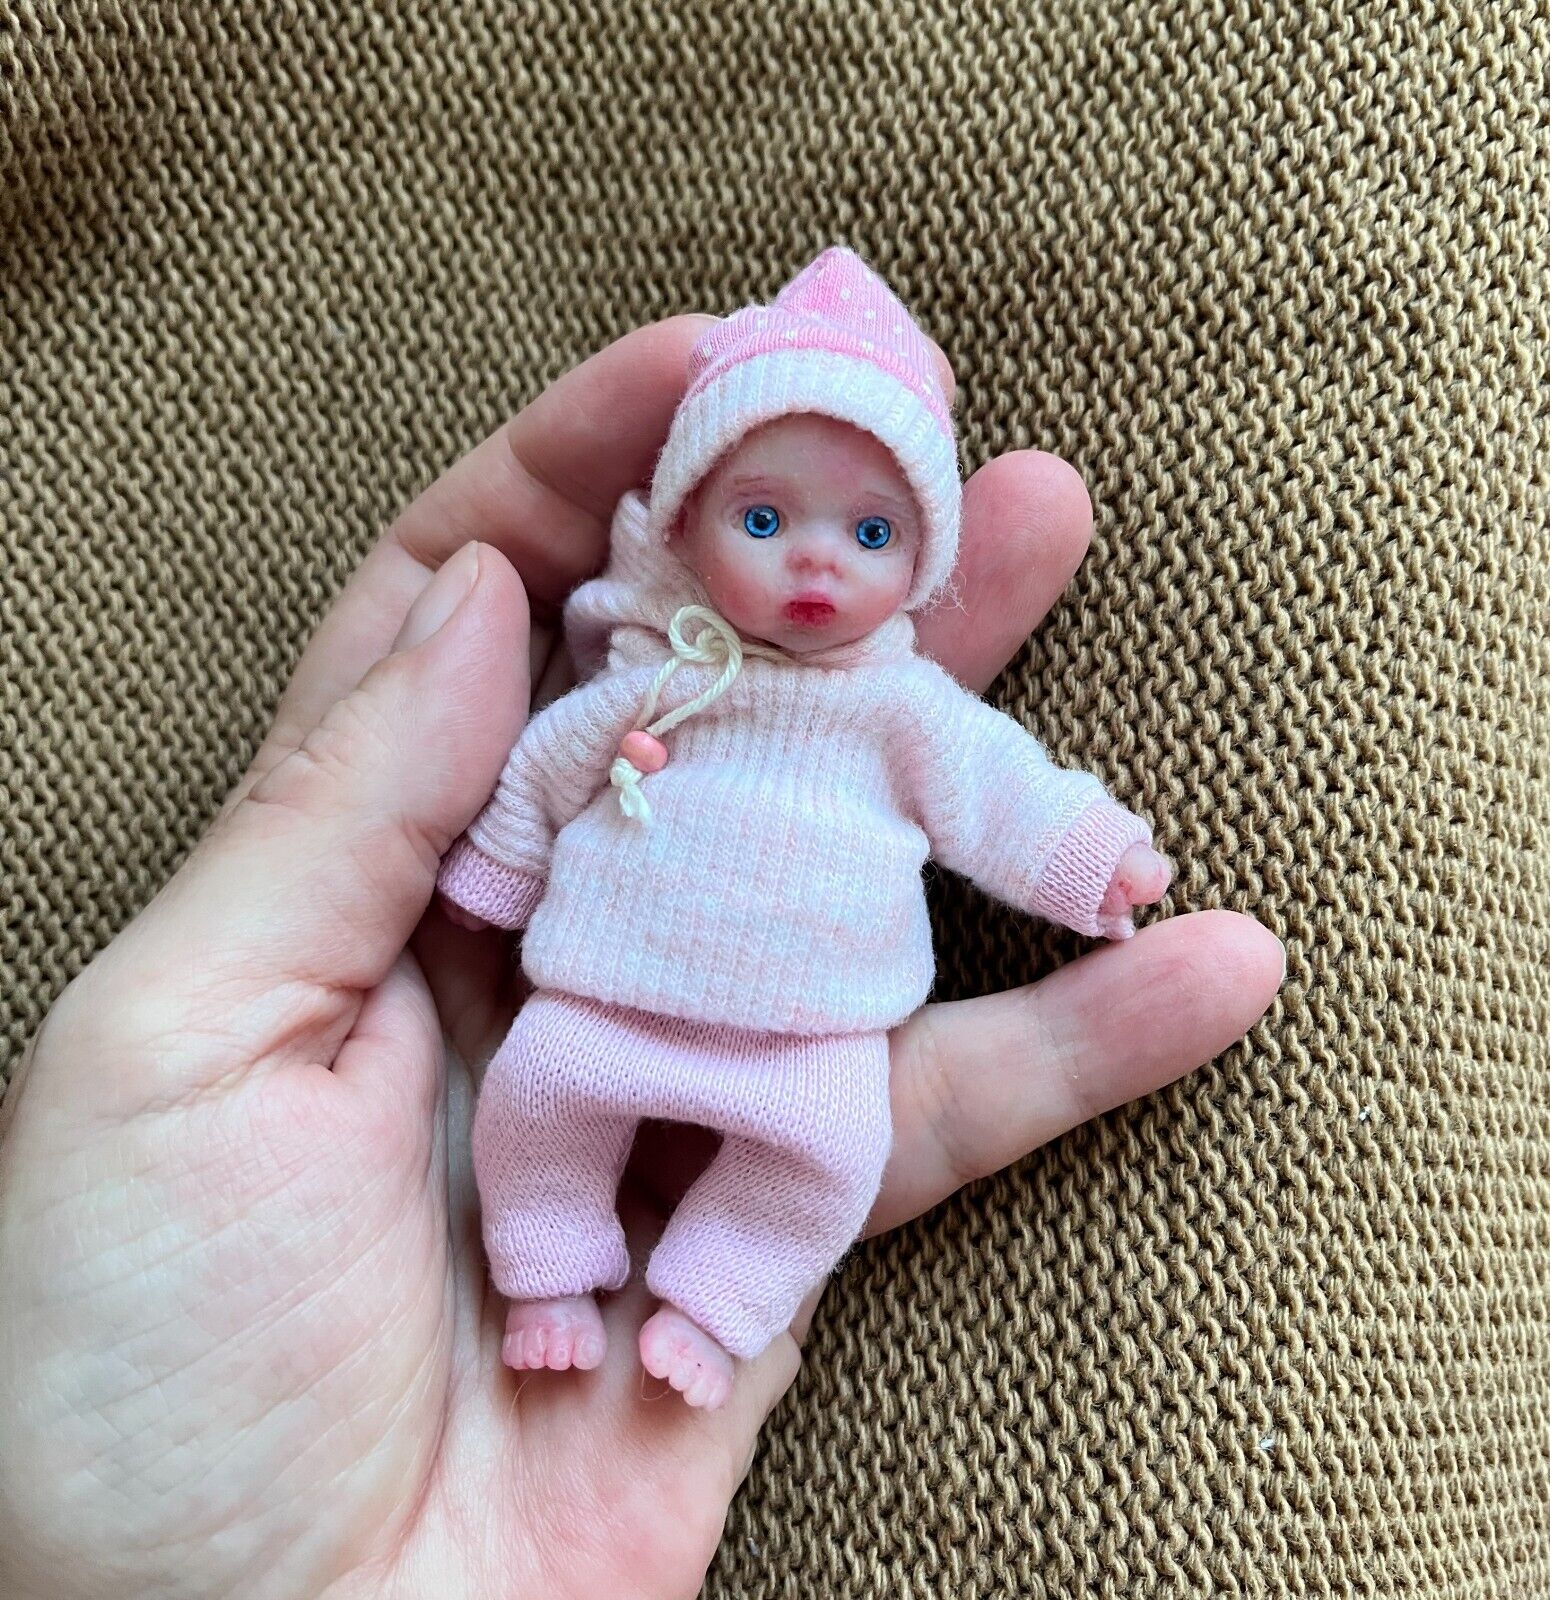 Mini silicone baby doll 4 inch Greta handsculpt by Kovalevadoll , painted